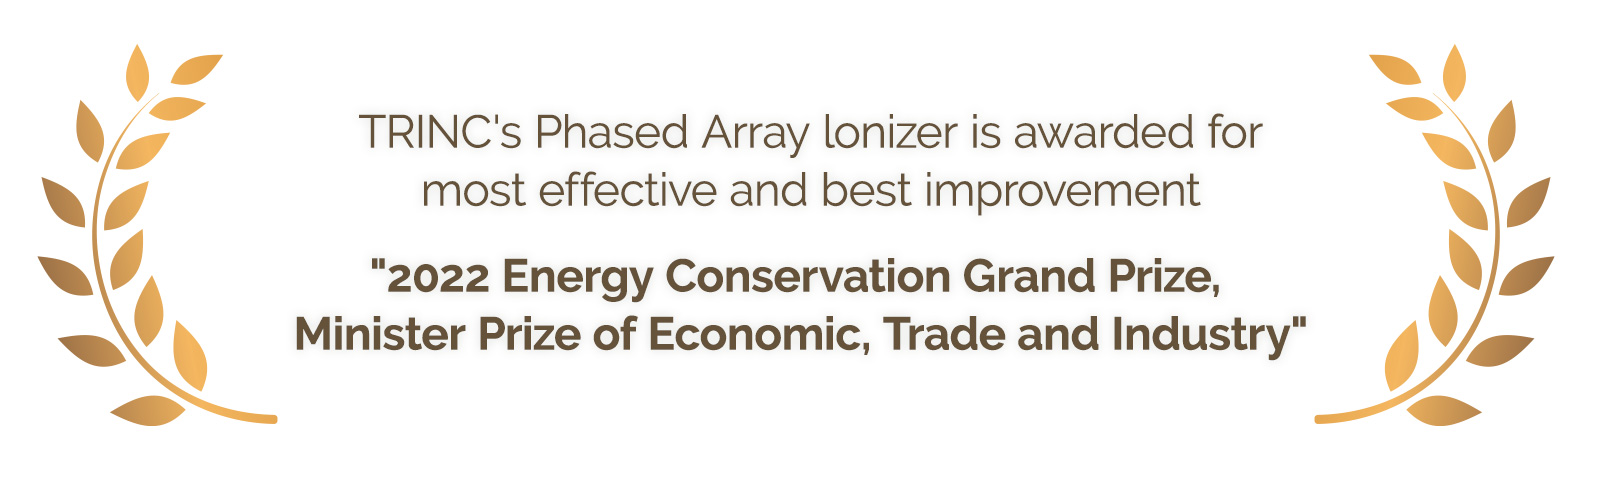 TRINC's Phased Array lonizer is awarded for most effective and best improvement - 2022 Energy Conservation Grand Prize, Minister Prize of Economic, Trade and Industry